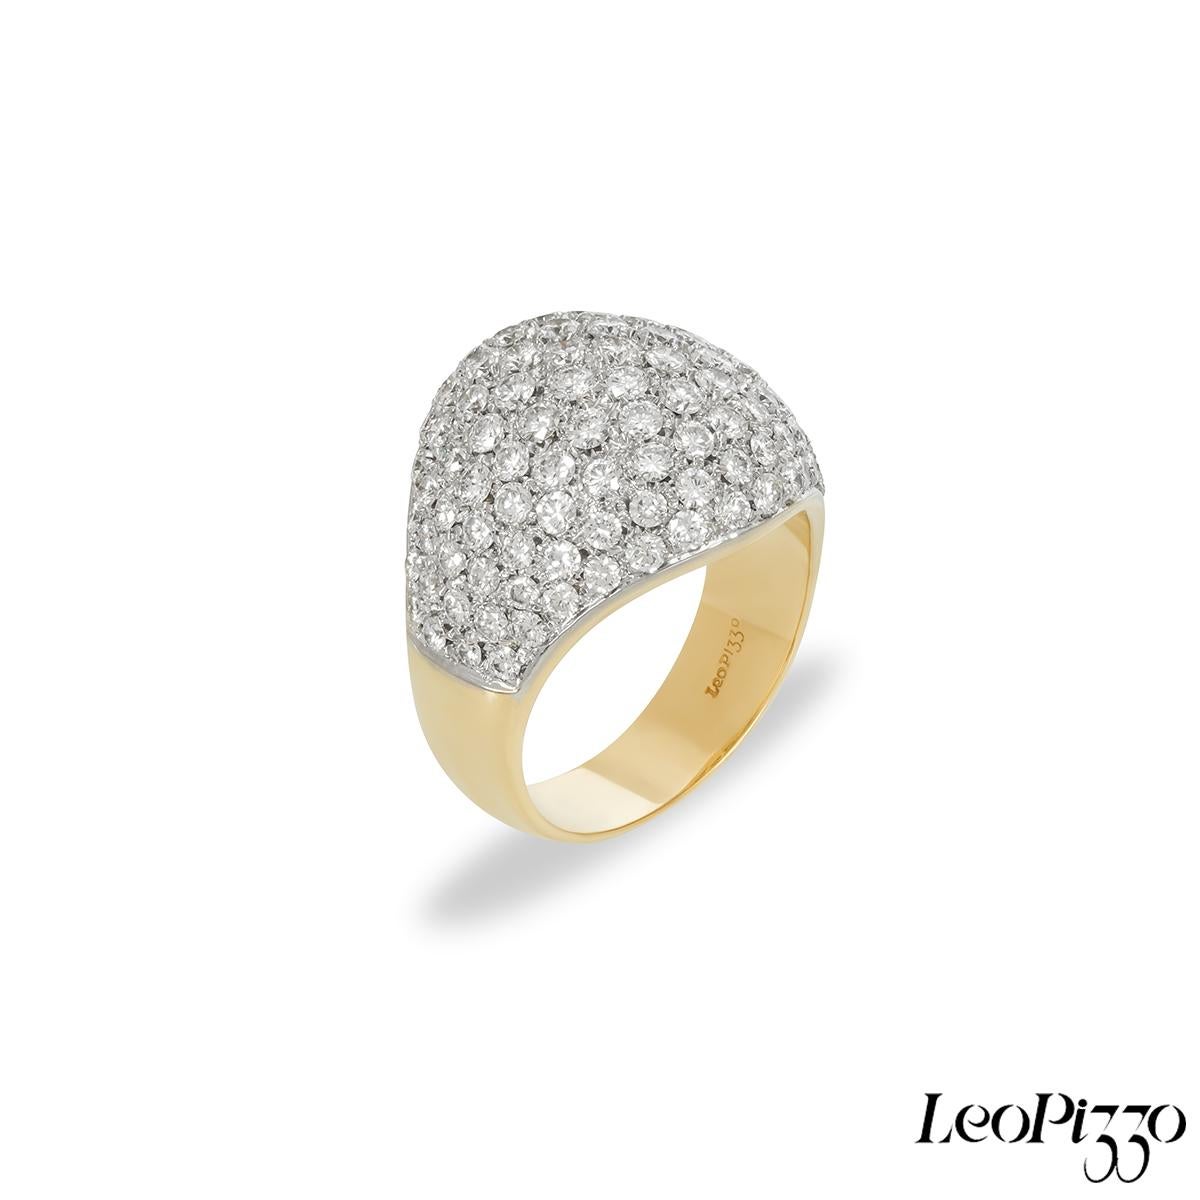 A sparkly 18k yellow gold diamond bombe ring by Leo Pizzo. The ring is pave set with 110 round brilliant cut diamonds with an approximate total weight of 4.95ct, F-G colour and VS-SI clarity. The dress ring measures 18.7mm wide and tapers down to